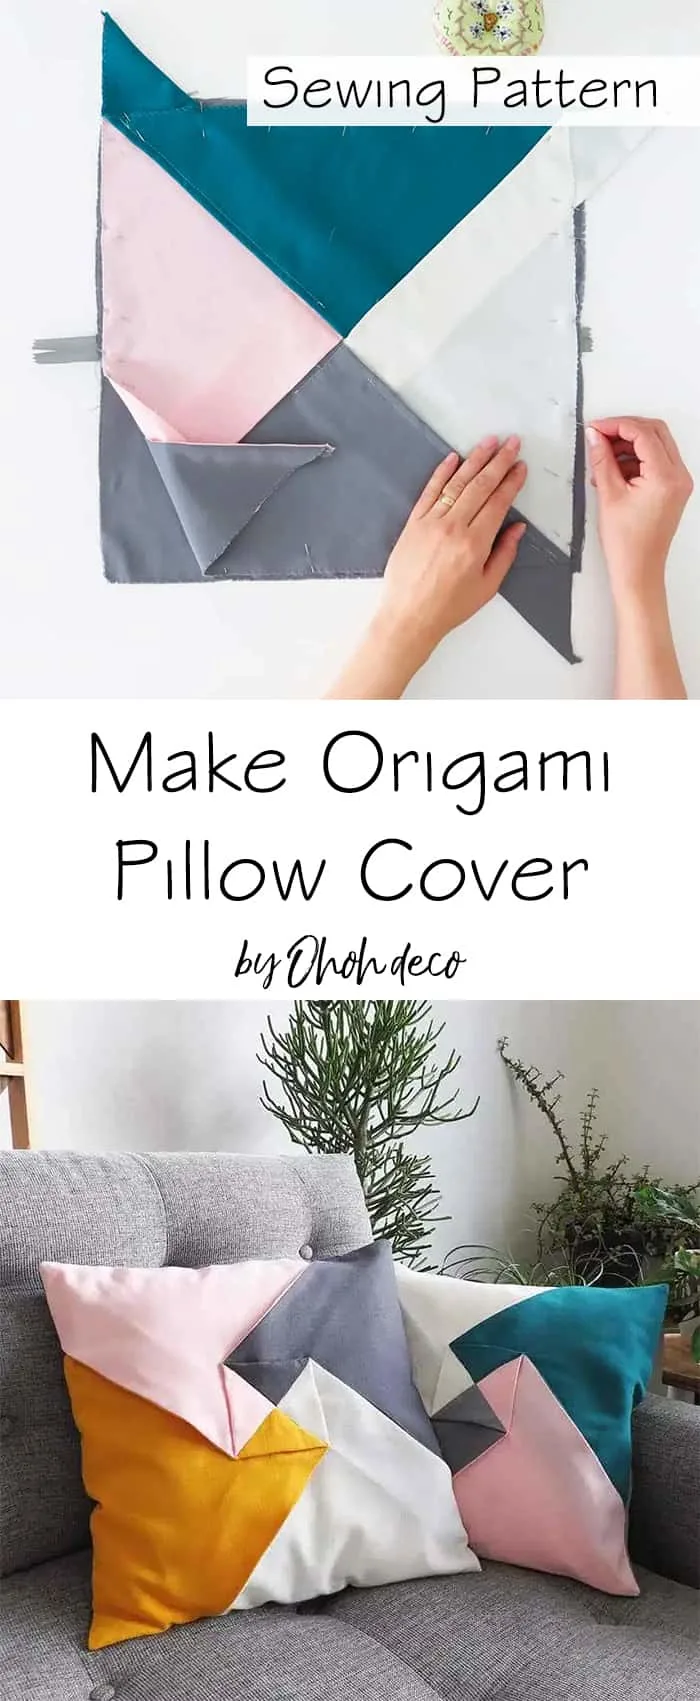 origami pillow cover sewing pattern and tutorial